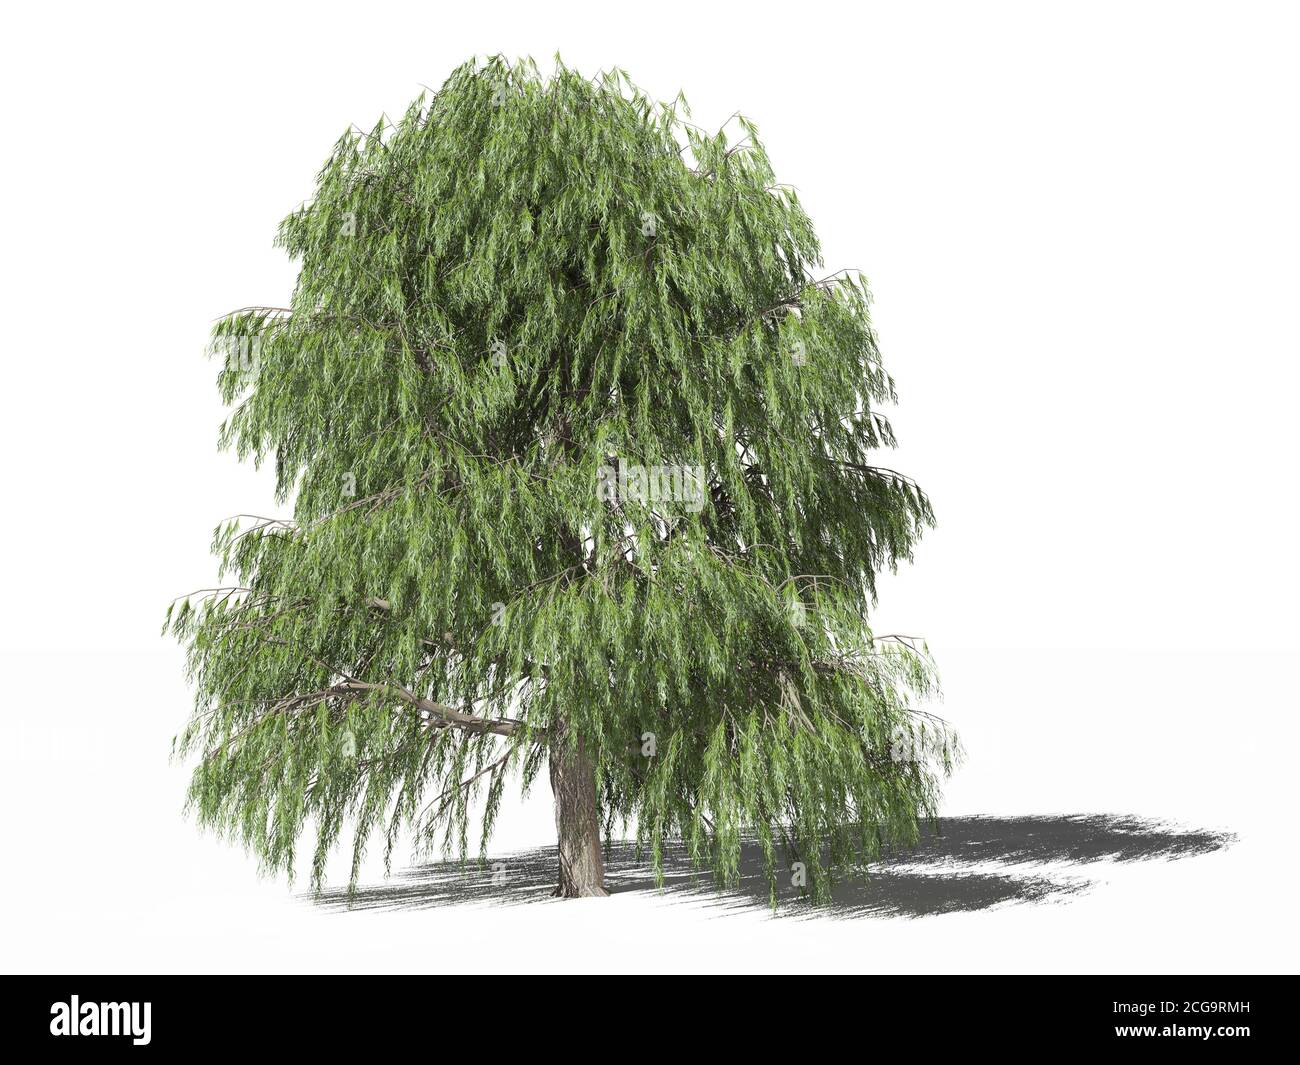 Weeping willow tree. One tree species of salix babylonica (babylon willow or weeping willow) in summer isolated on white surface. 3D Illustration Stock Photo